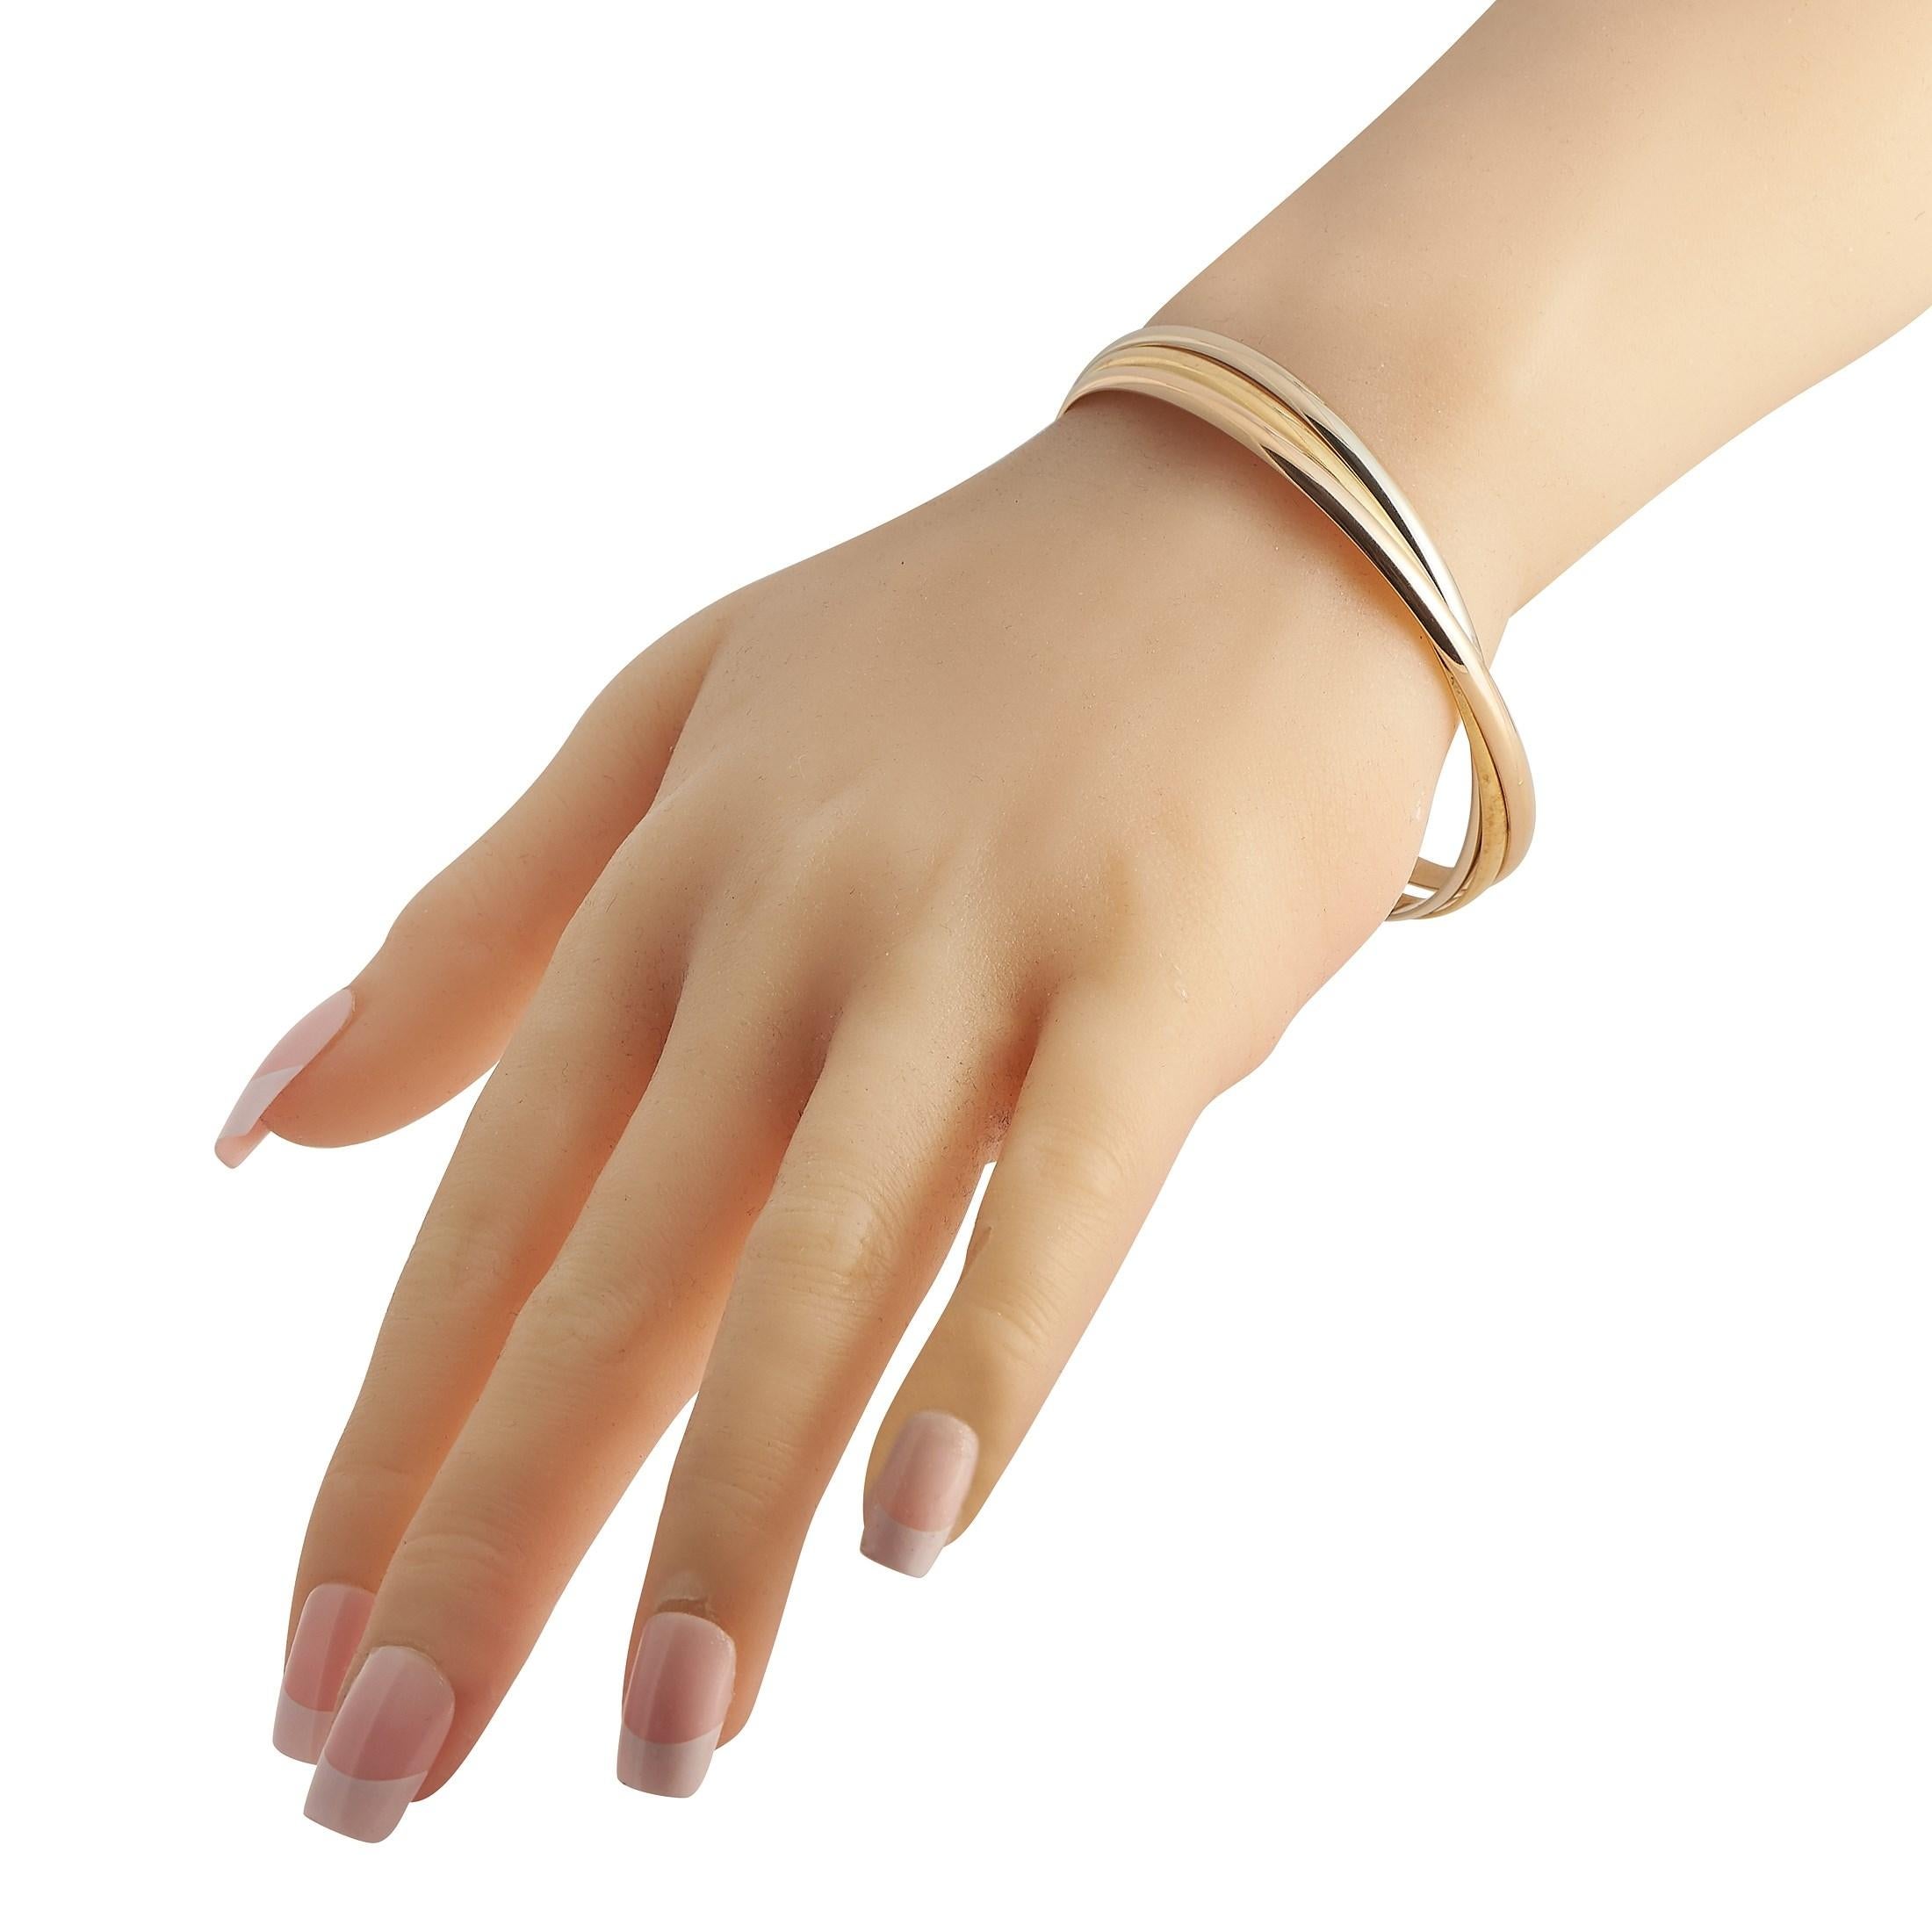 With restrained elegance and symbolic meaning, there's no reason why you wouldn't want to add this Cartier bangle bracelet to your jewelry collection. Called a Trinity Bracelet, this piece features rose gold, white gold, and yellow gold rings